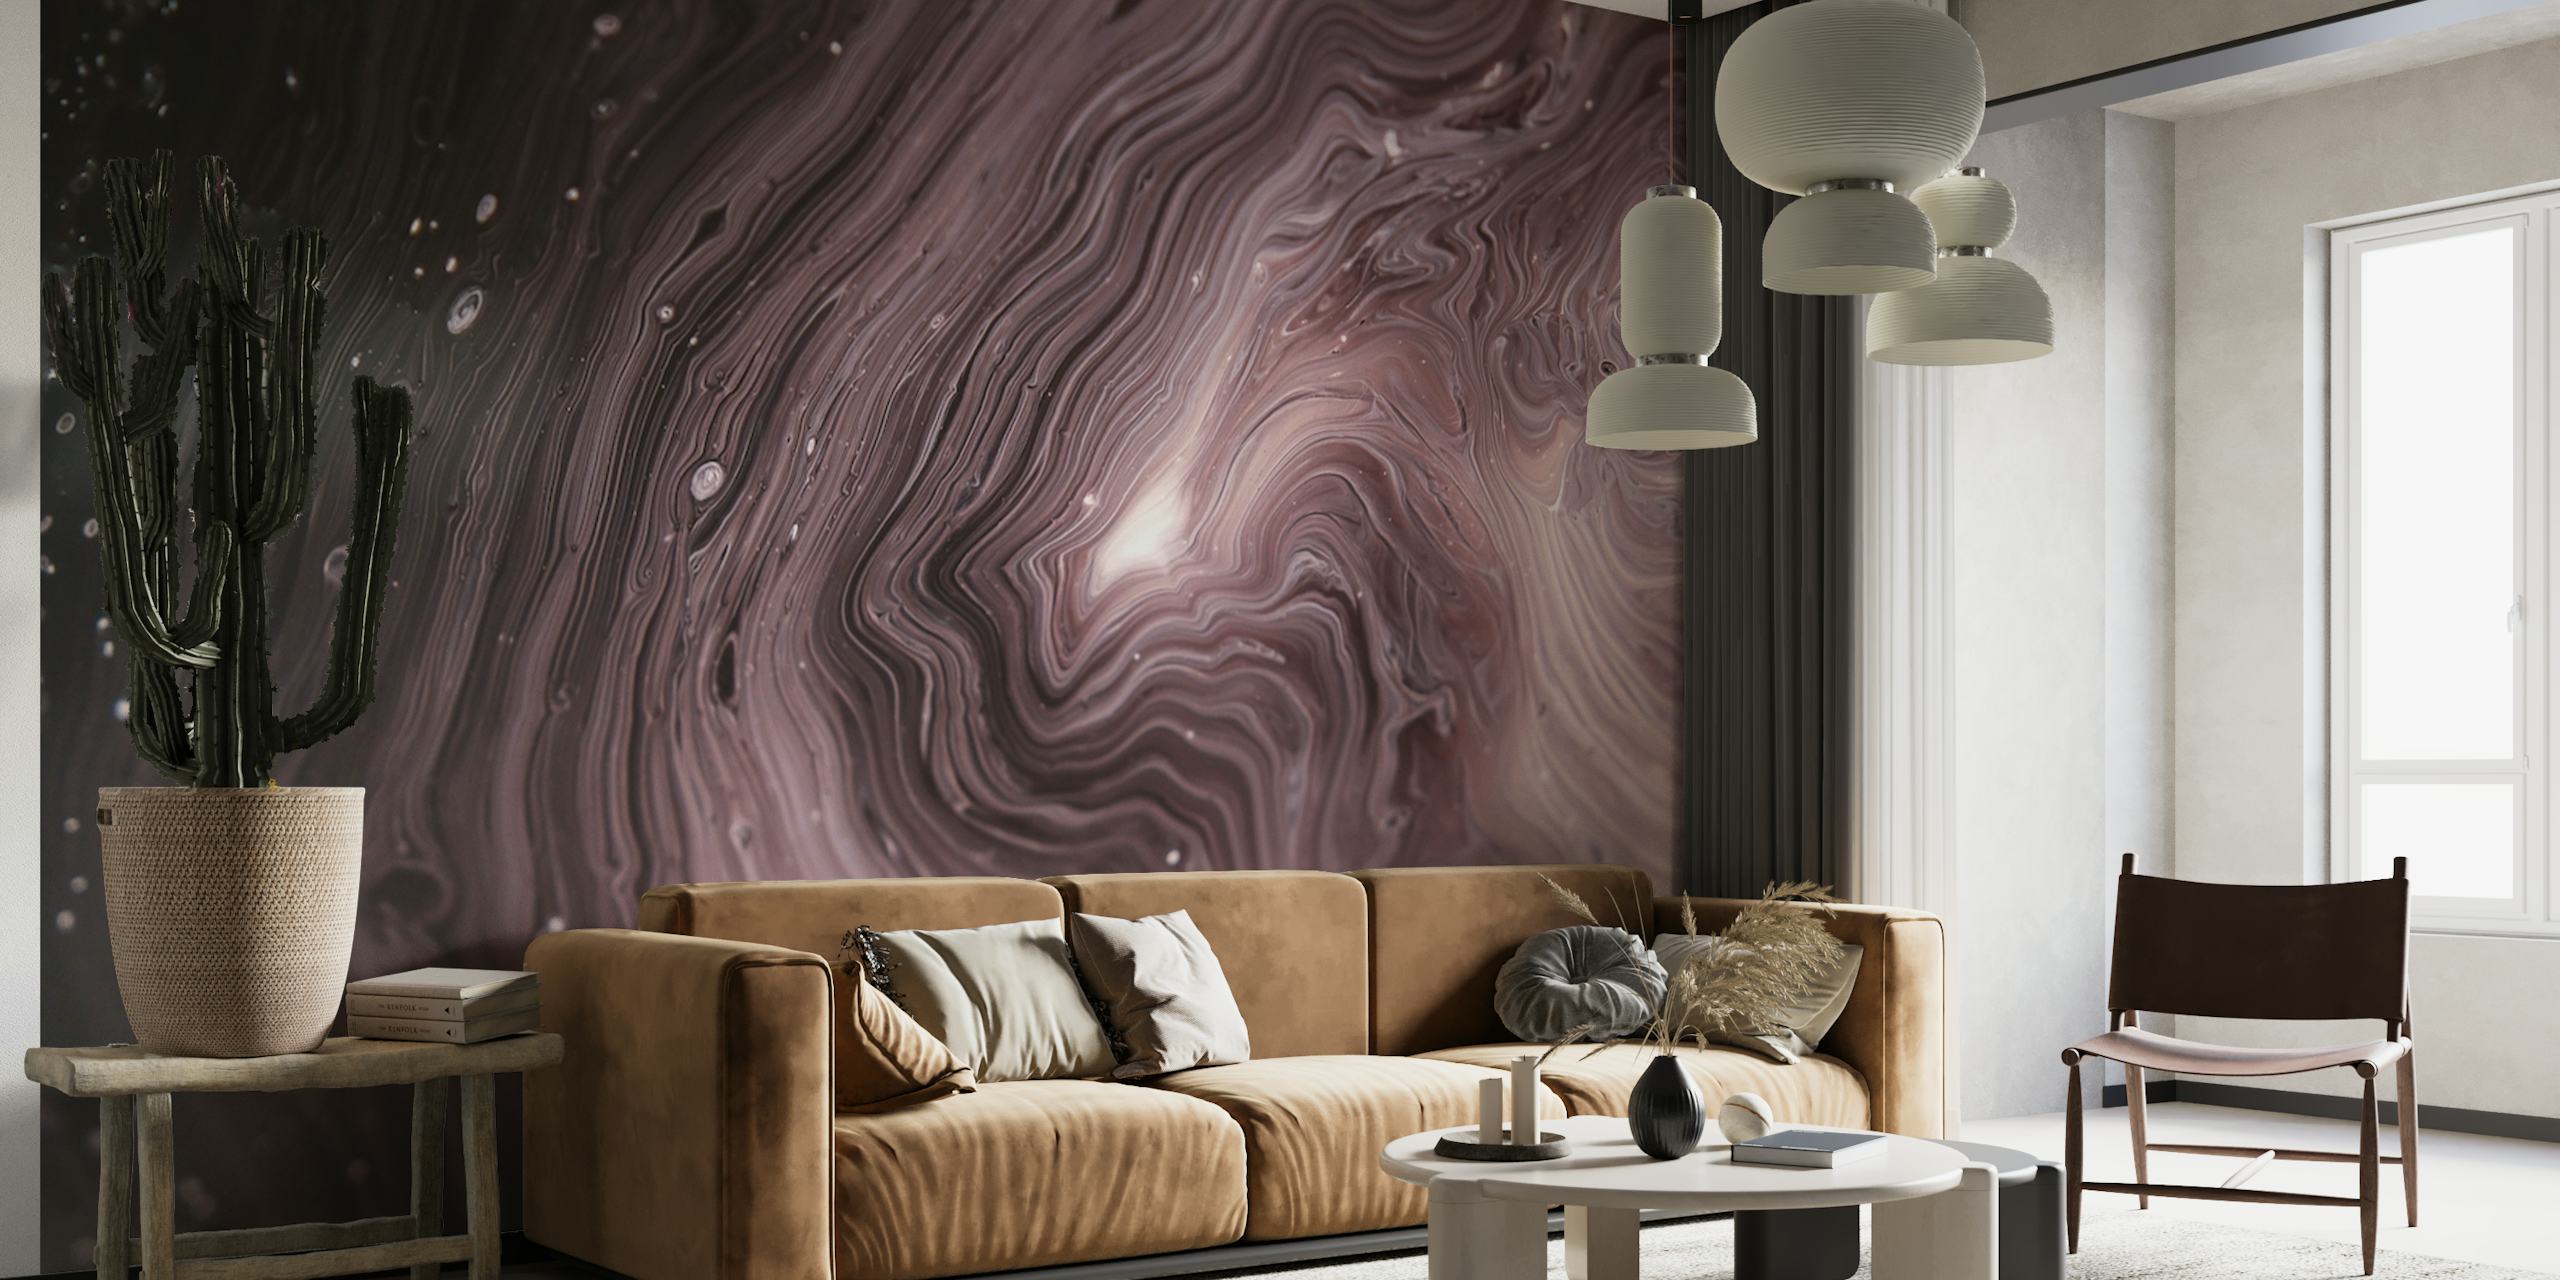 Abstract colored rays mural with swirling hues and dynamic textures